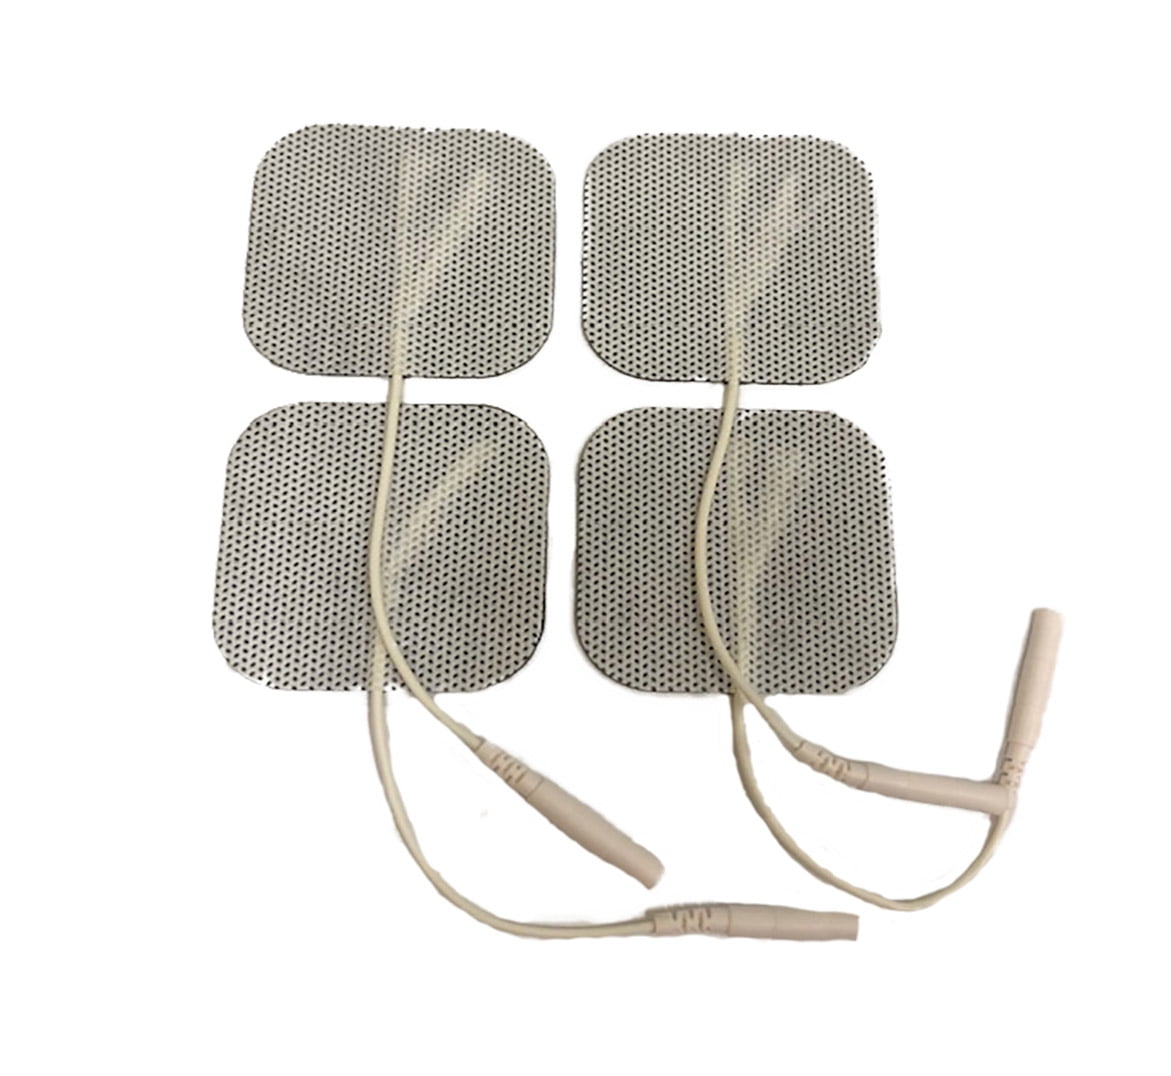 120Pack Tens Electrode Pads EMS Replacement Unit 2x2 7000 3000 Muscle  Stimulator